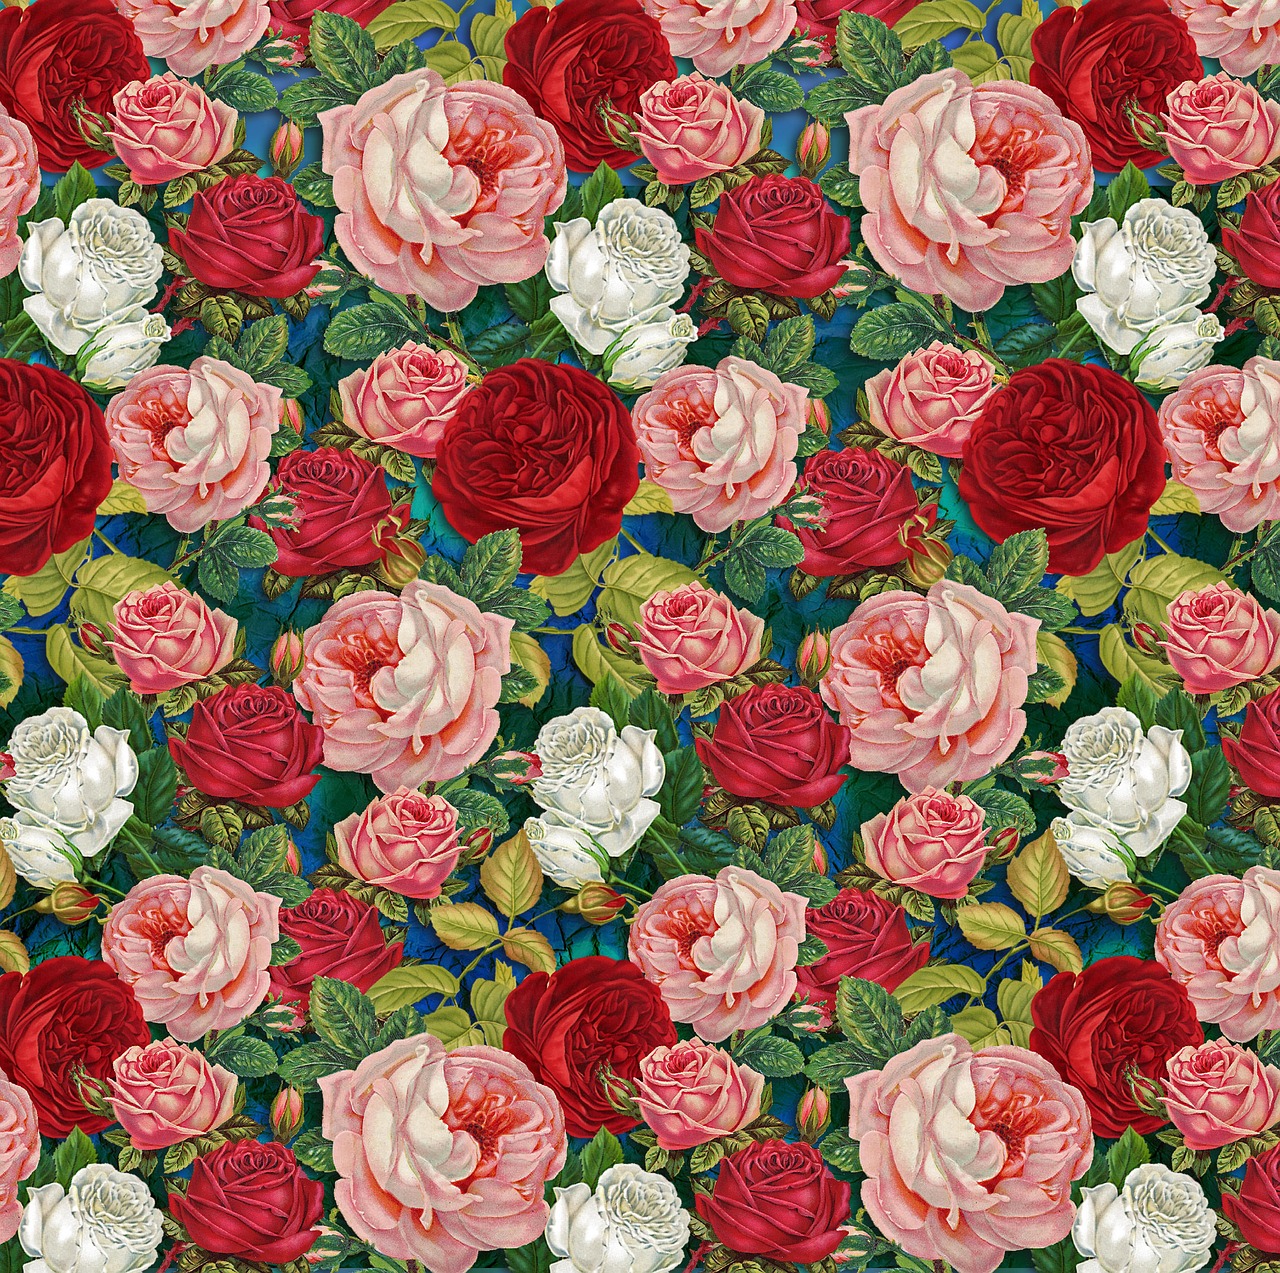 roses  repeat  floral free photo